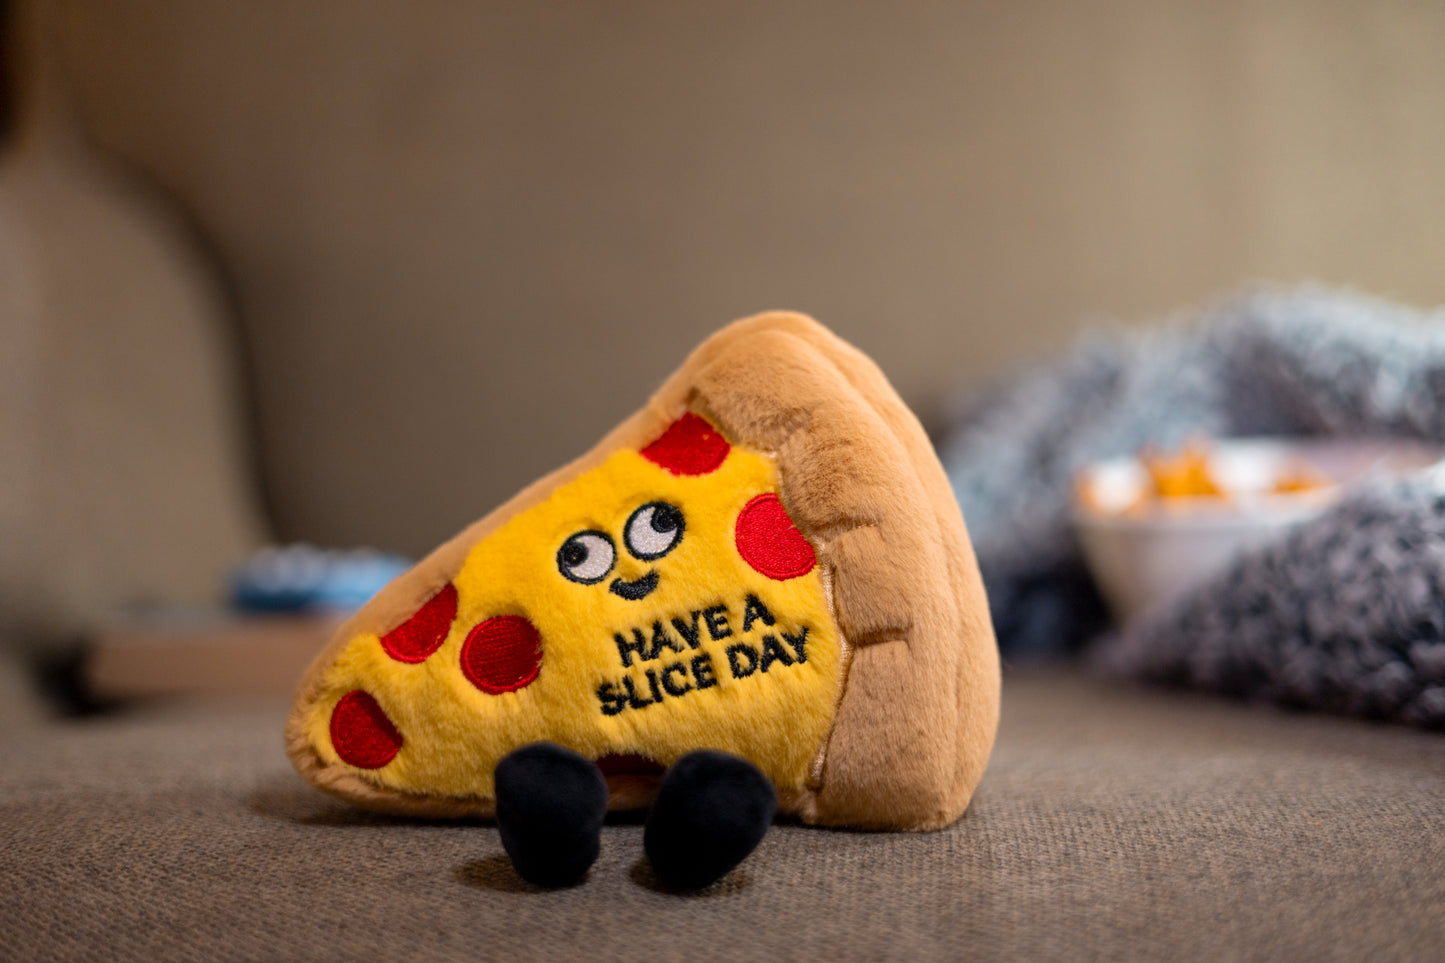 "Have a Slice Day" Pizza Plush